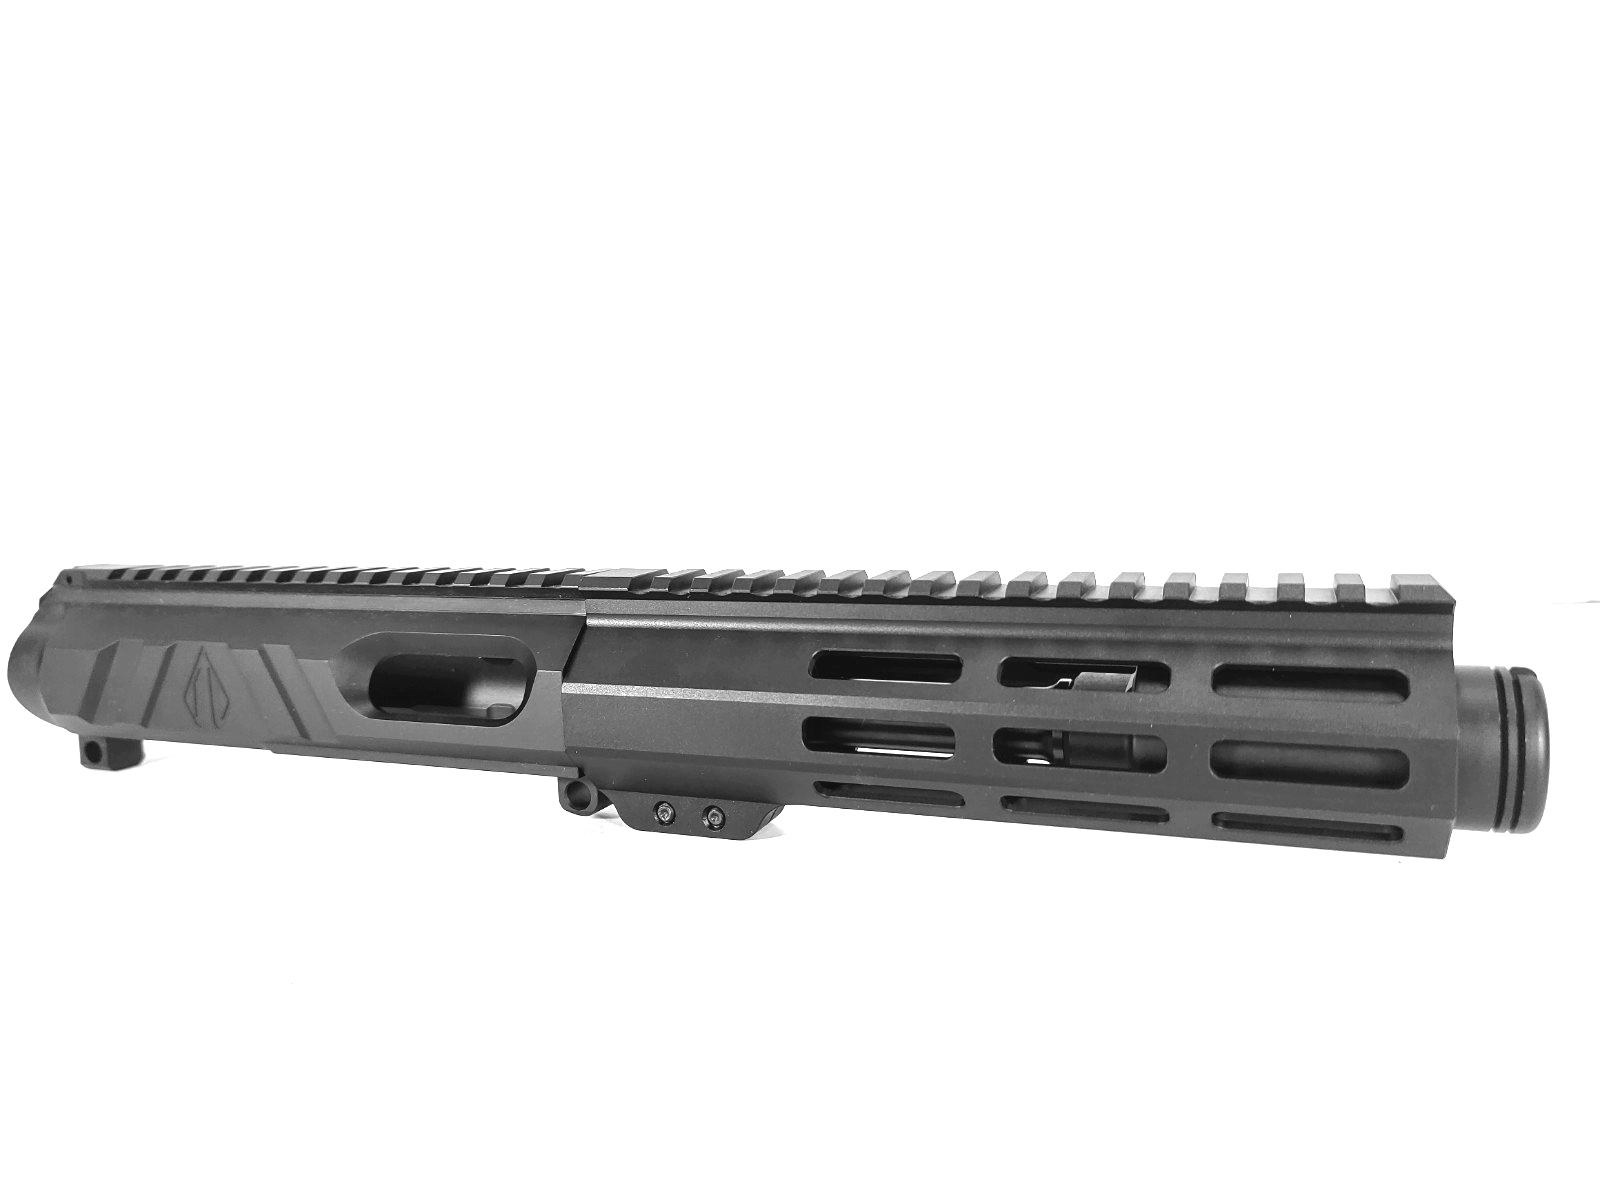 5 inch AR15 AR-15 AR Non Reciprocating Side Charging 9mm Melonite Upper w/CAN